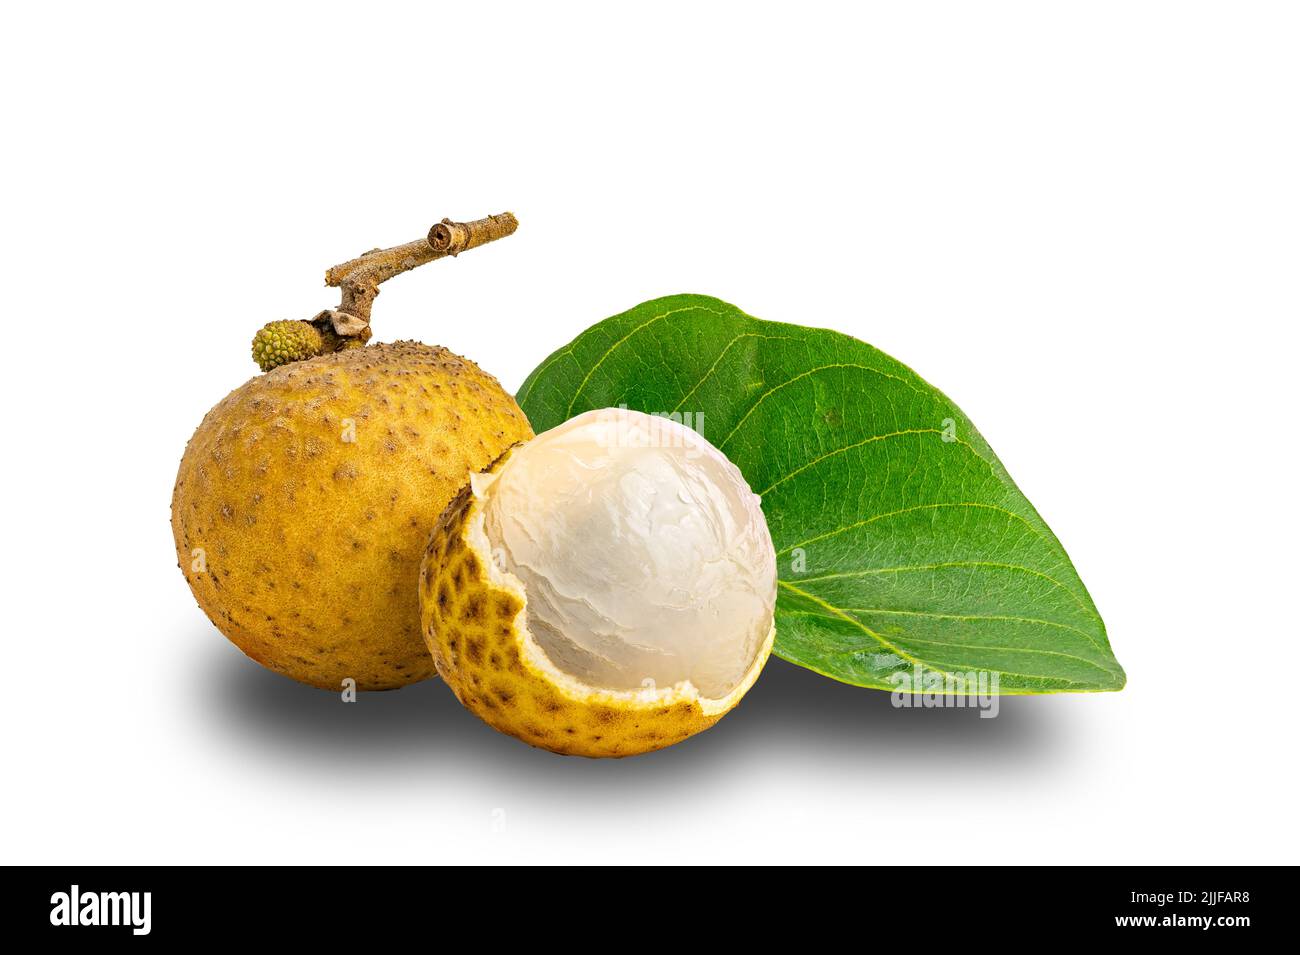 Longan fruit a whole and a half peeled with green leaf isolated on white background with clipping path. Stock Photo